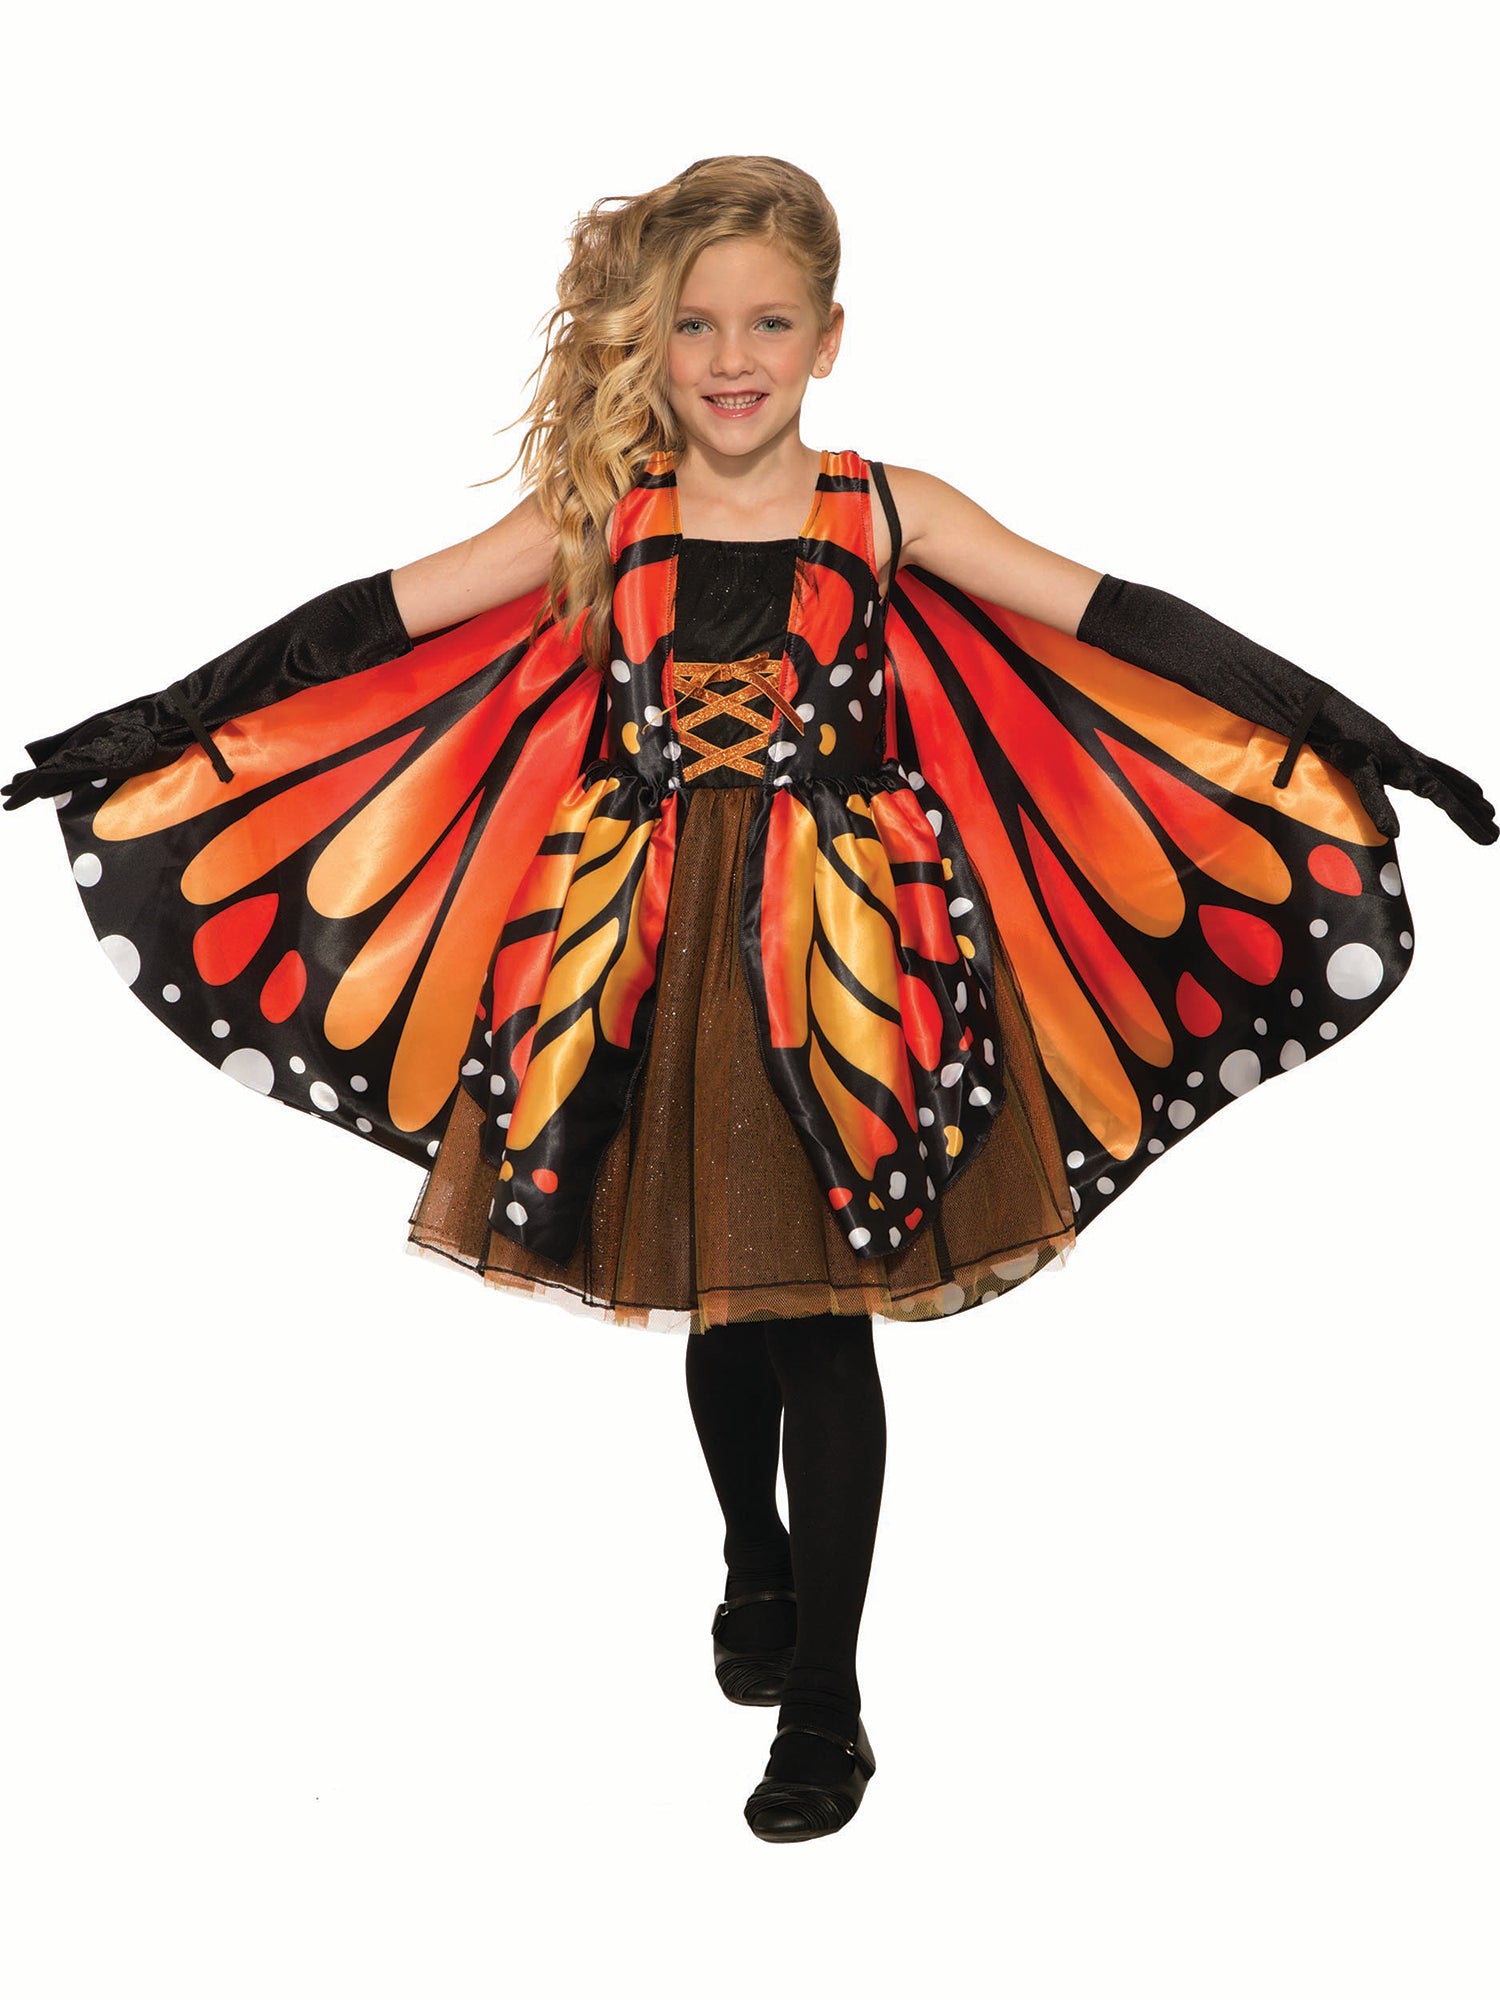 Kid's Butterfly Girl Costume - costumes.com